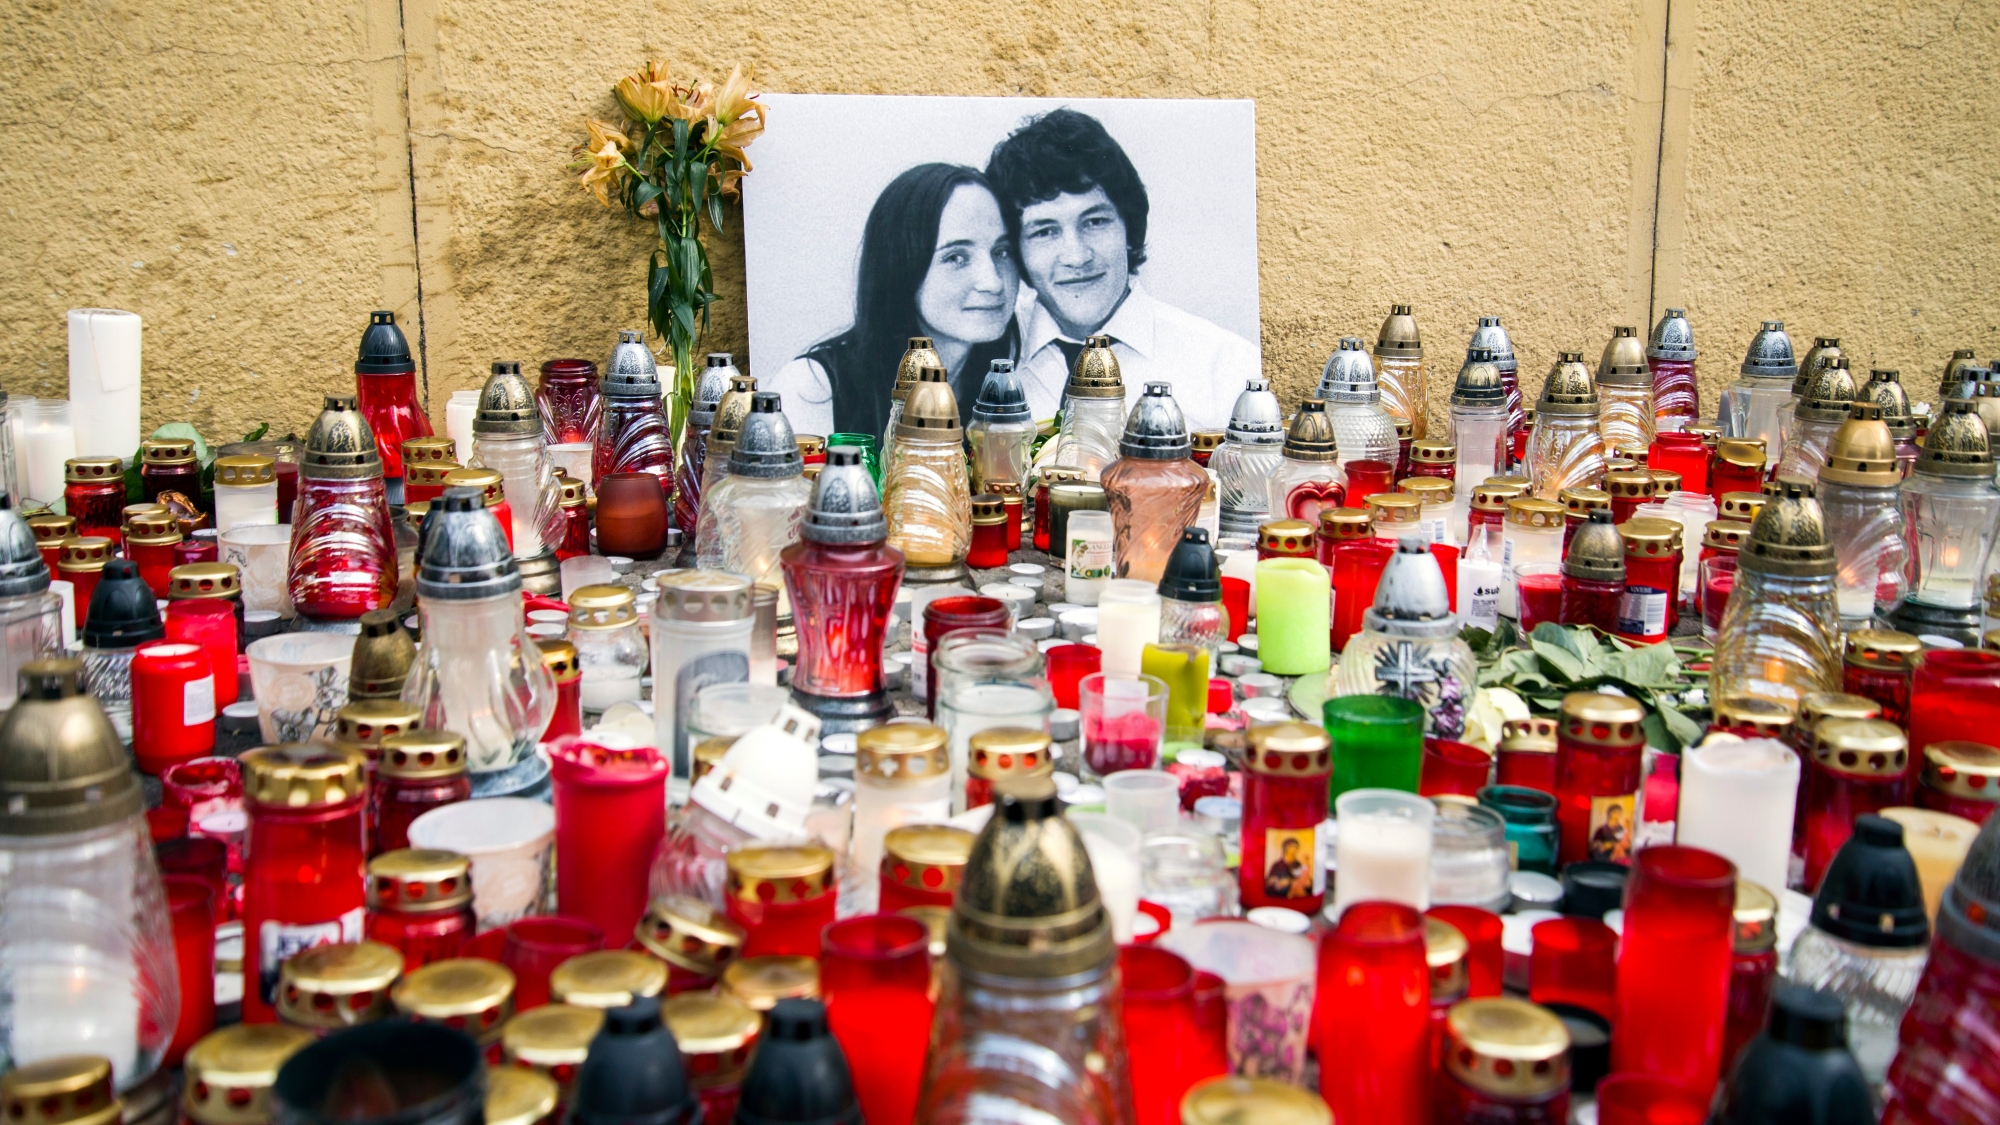 Candles are left in tribute to murdered Slovakian investigative reporter Jan Kuciak, 27, and his fiancee Martina, 27, at Slovak National Uprising Square in Bratislava, on Tuesday, Feb. 27, 2018. A leading Slovak newspaper says organized crime may have been involved in the shooting death of an investigative journalist that shocked Slovakia. The bodies of Kuciak and Kusnirova were found Sunday evening in their house in the town of Velka Maca, east of the capital, Bratislava. (Jakub Kotian/TASR via AP) Slovakia Journalist Killed